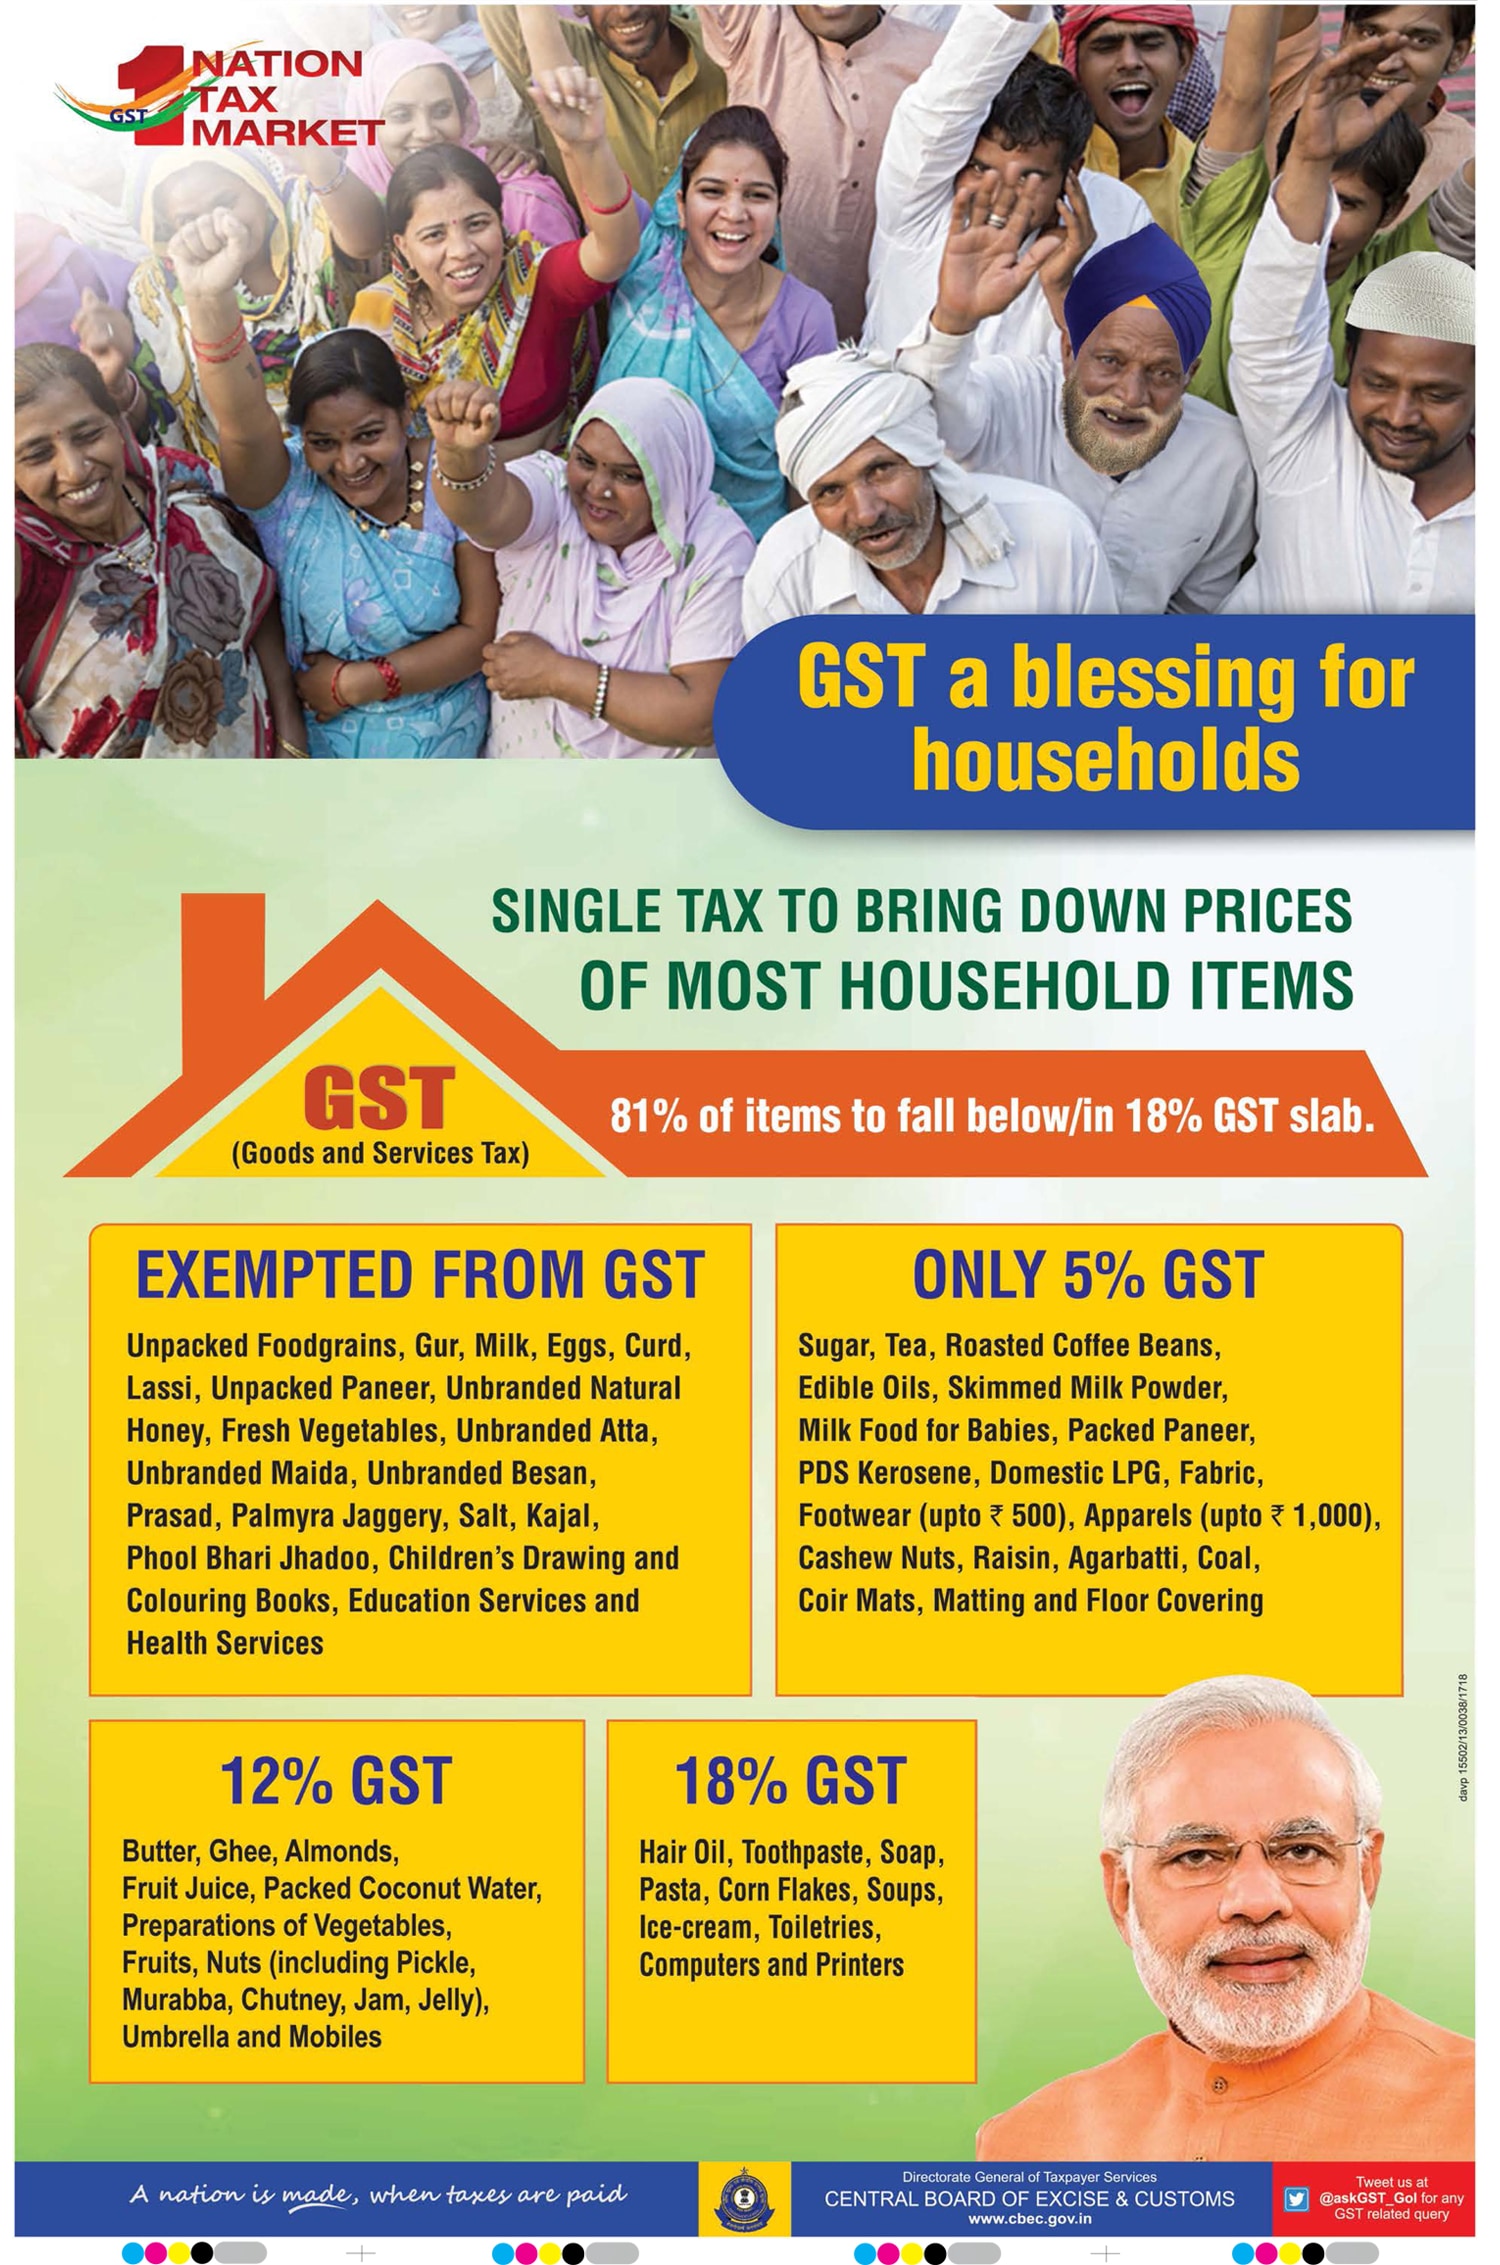 gst-nation-tax-market-single-tax-to-bring-down-prices-of-most